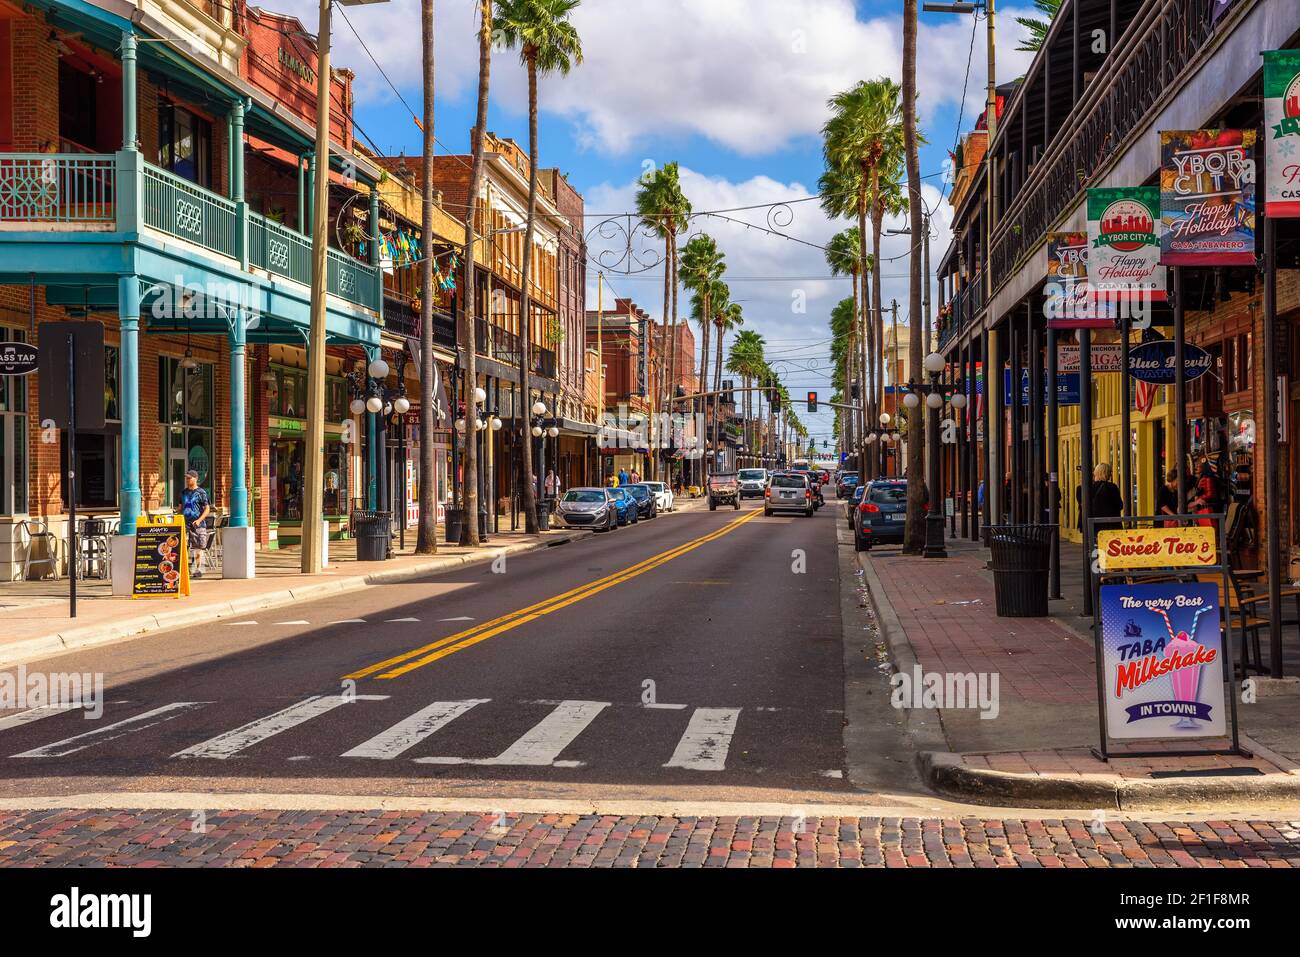 7th Avenue in the Historic Ybor City in Tampa Bay, Florida Stock Photo